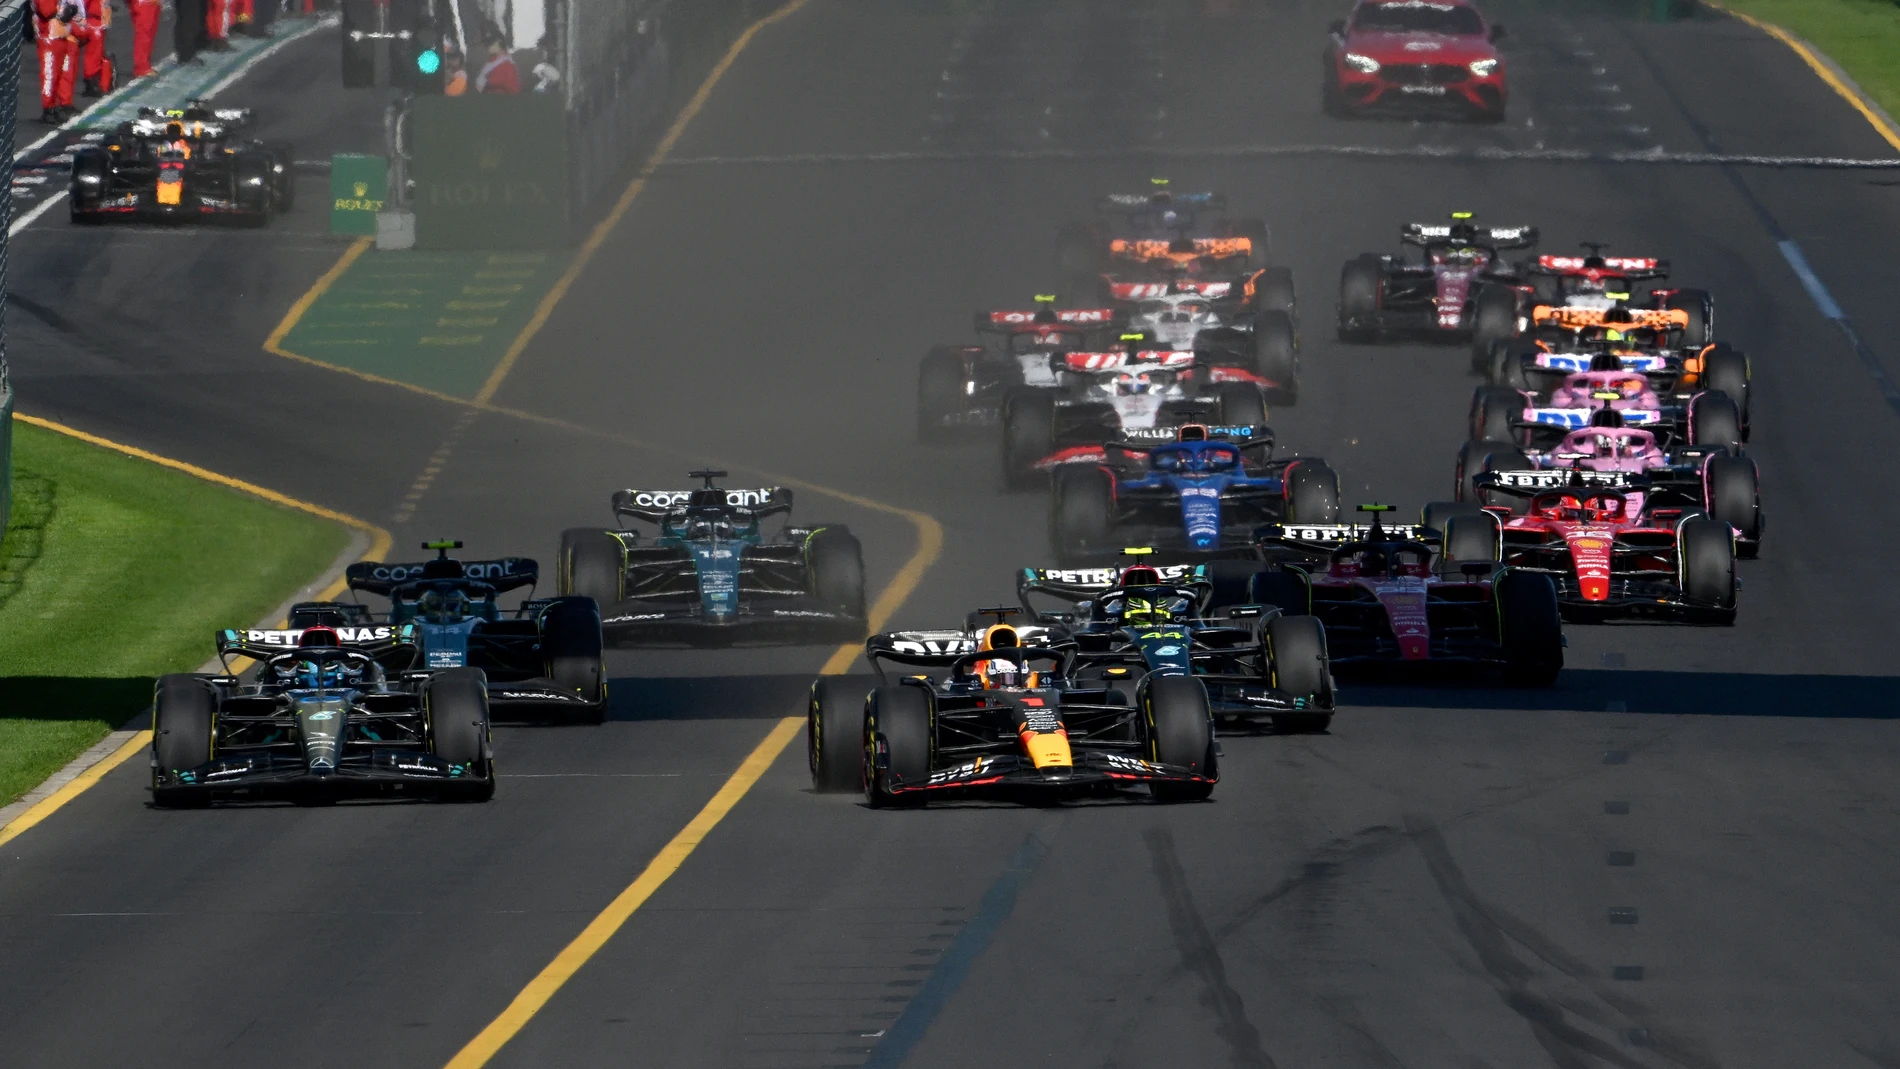 Melbourne (Australia), 02/04/2023.- Mercedes driver George Russell of Great Britain (L) passes Red Bull driver Max Verstappen of Netherlands (R) at the start of the 2023 Australian Grand Prix at the Albert Park Circuit in Melbourne, Australia, 02 April 2023. (Fórmula Uno, Gran Bretaña, Países Bajos; Holanda, Reino Unido) EFE/EPA/JAMES ROSS EDITORIAL USE ONLY AUSTRALIA AND NEW ZEALAND OUT 